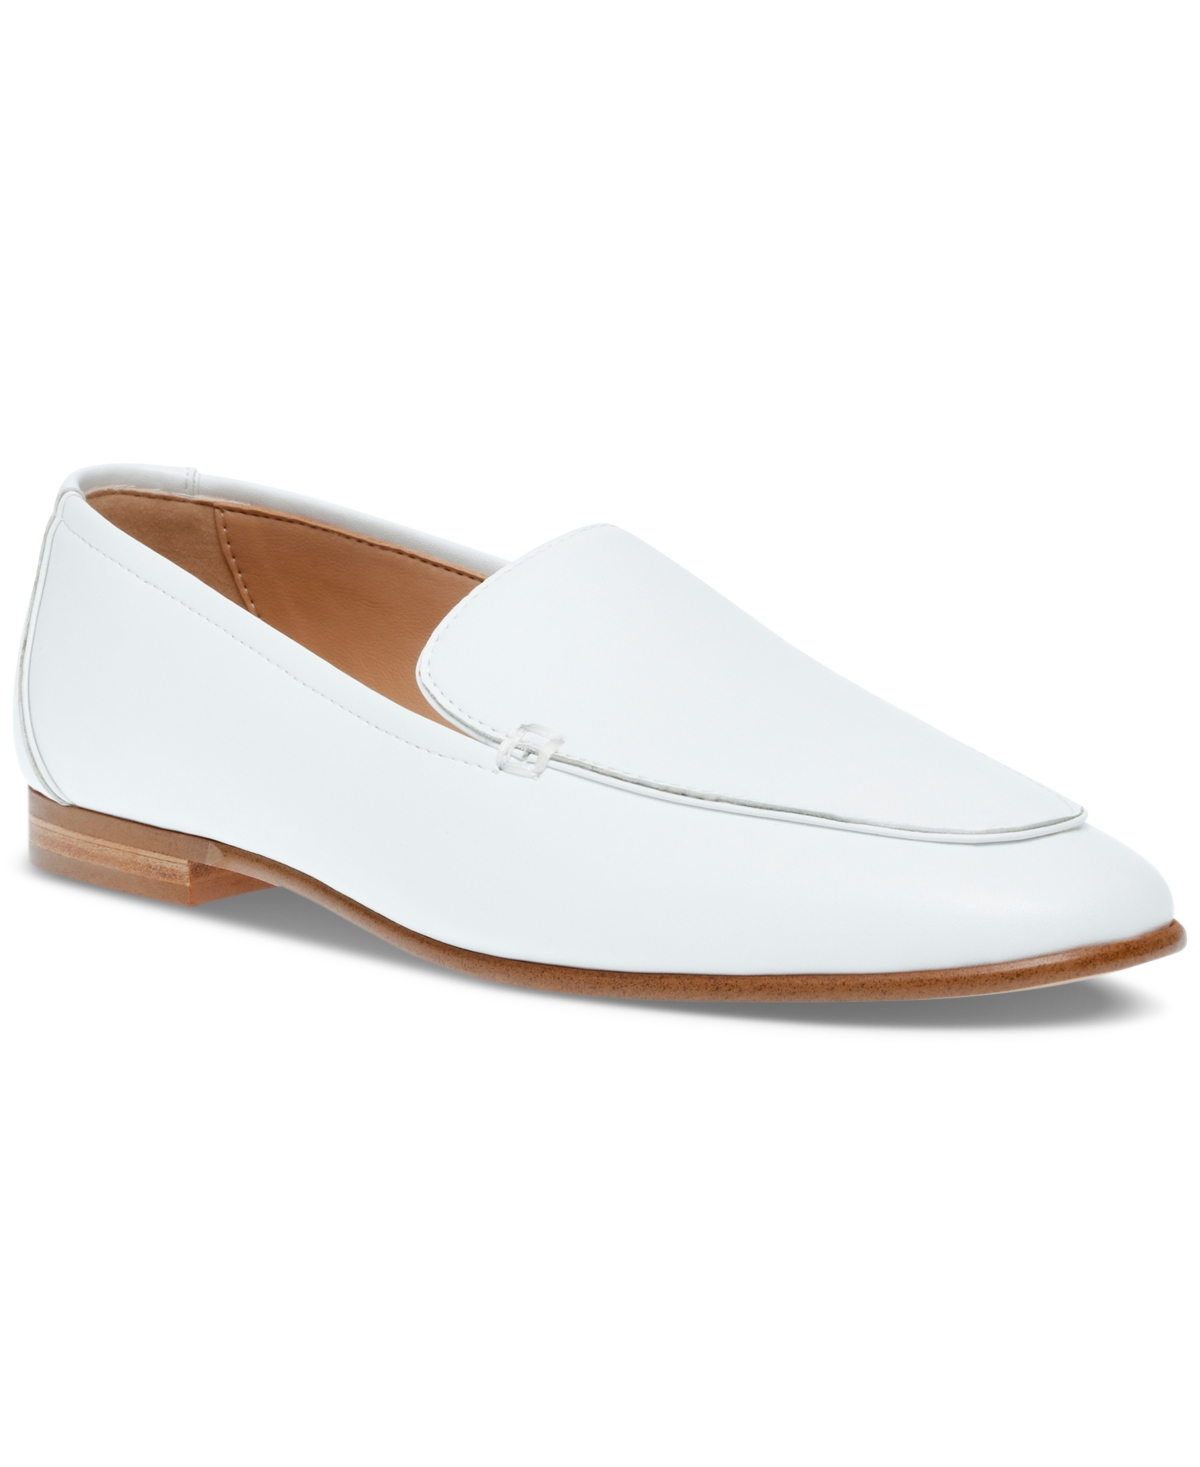 Women's Fitz Soft Tailored Loafer Flats - White Leather